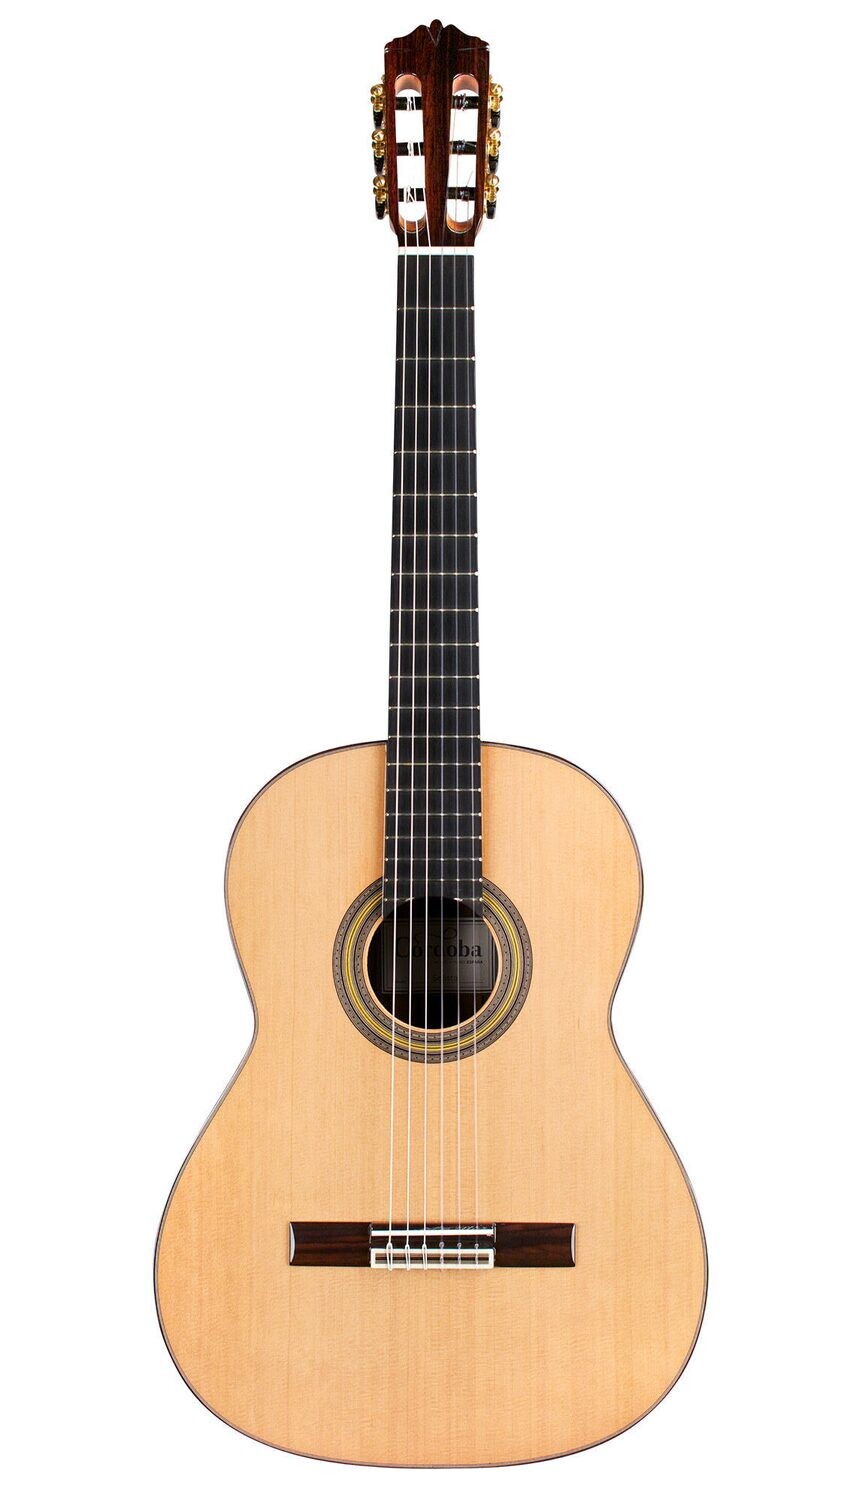 Cordoba Solista - All Solid Wood Nylon String Classical Guitar - Solid Cedar Top, Solid Indian Rosewood Back/Sides